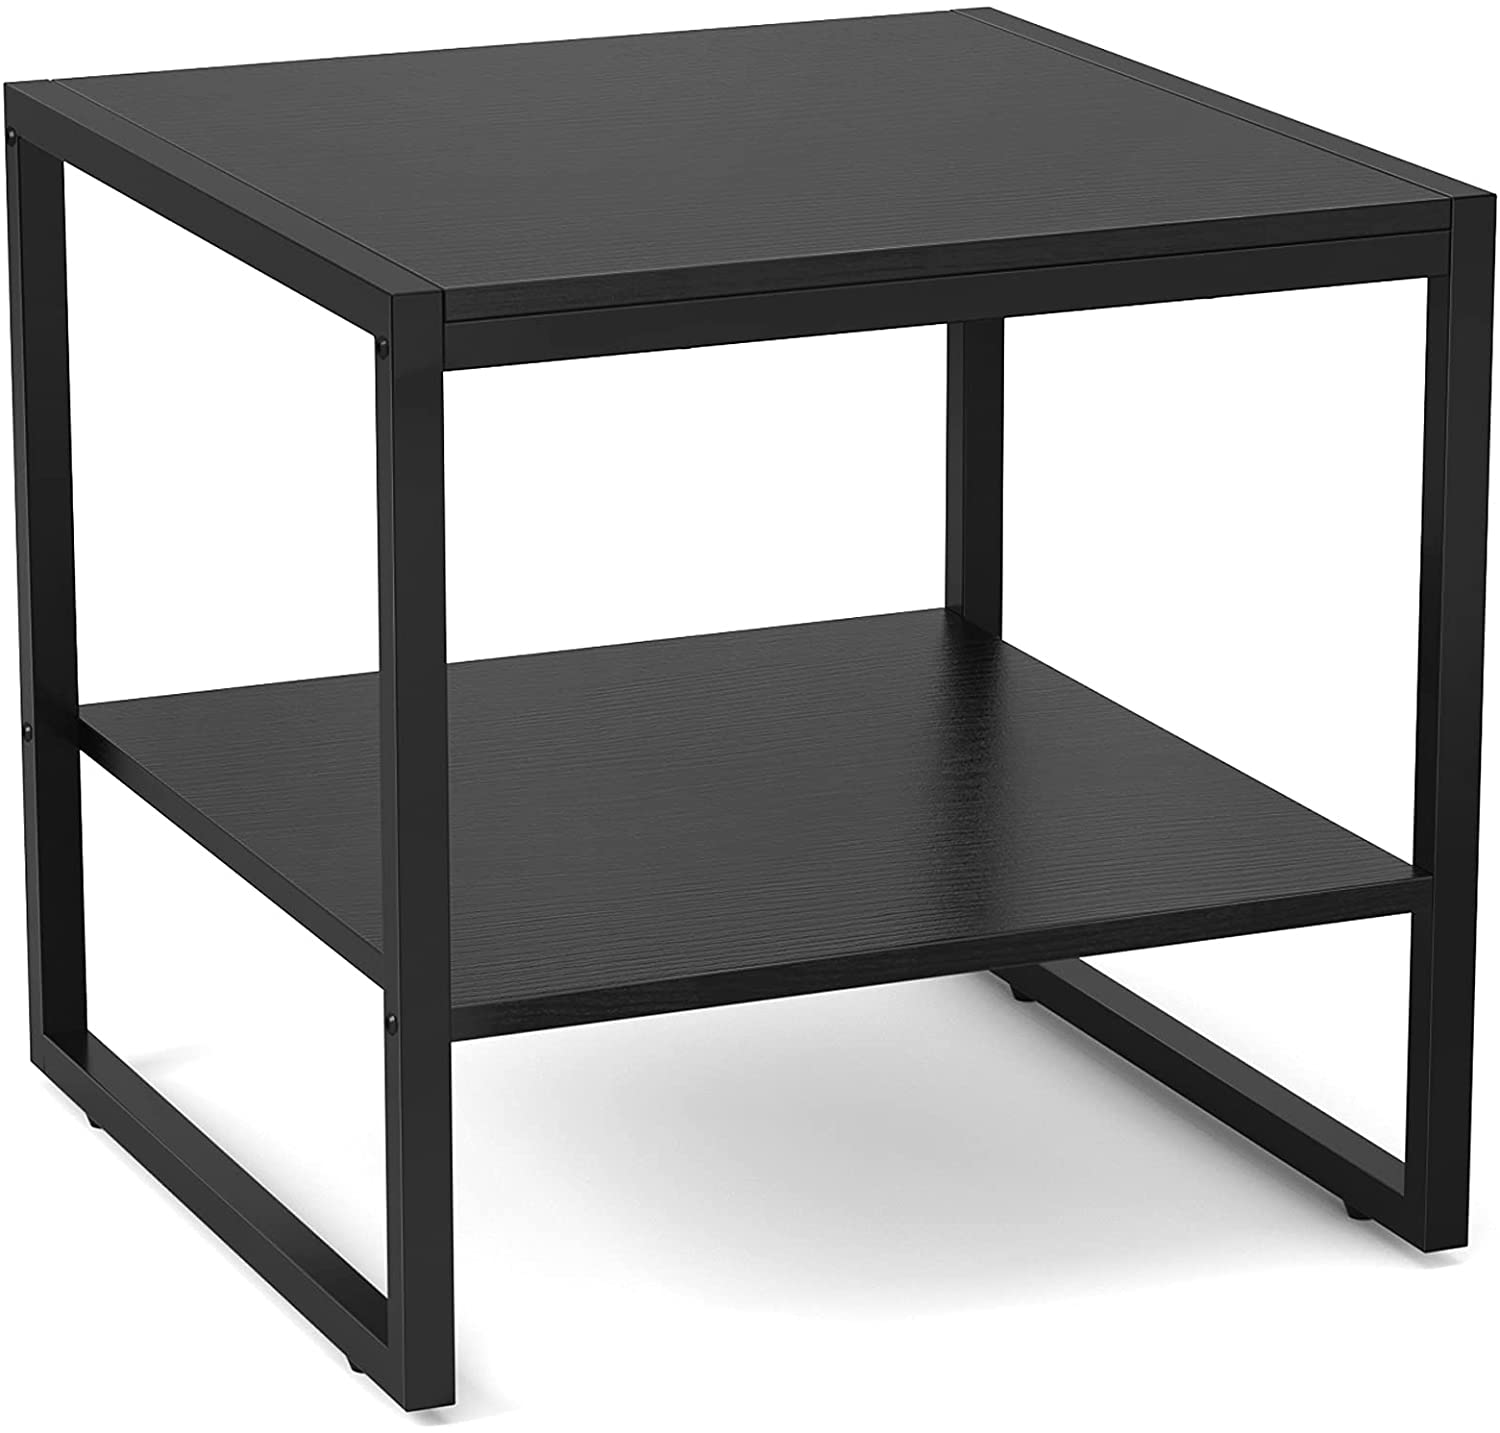 Photo 1 of Besiture End Table 20 Inch Square Side Table Modern Night Stand with 2Tier Storage Shelf Living Room Small Coffee Table Wood Finish Bedside Table for Bedroom Black